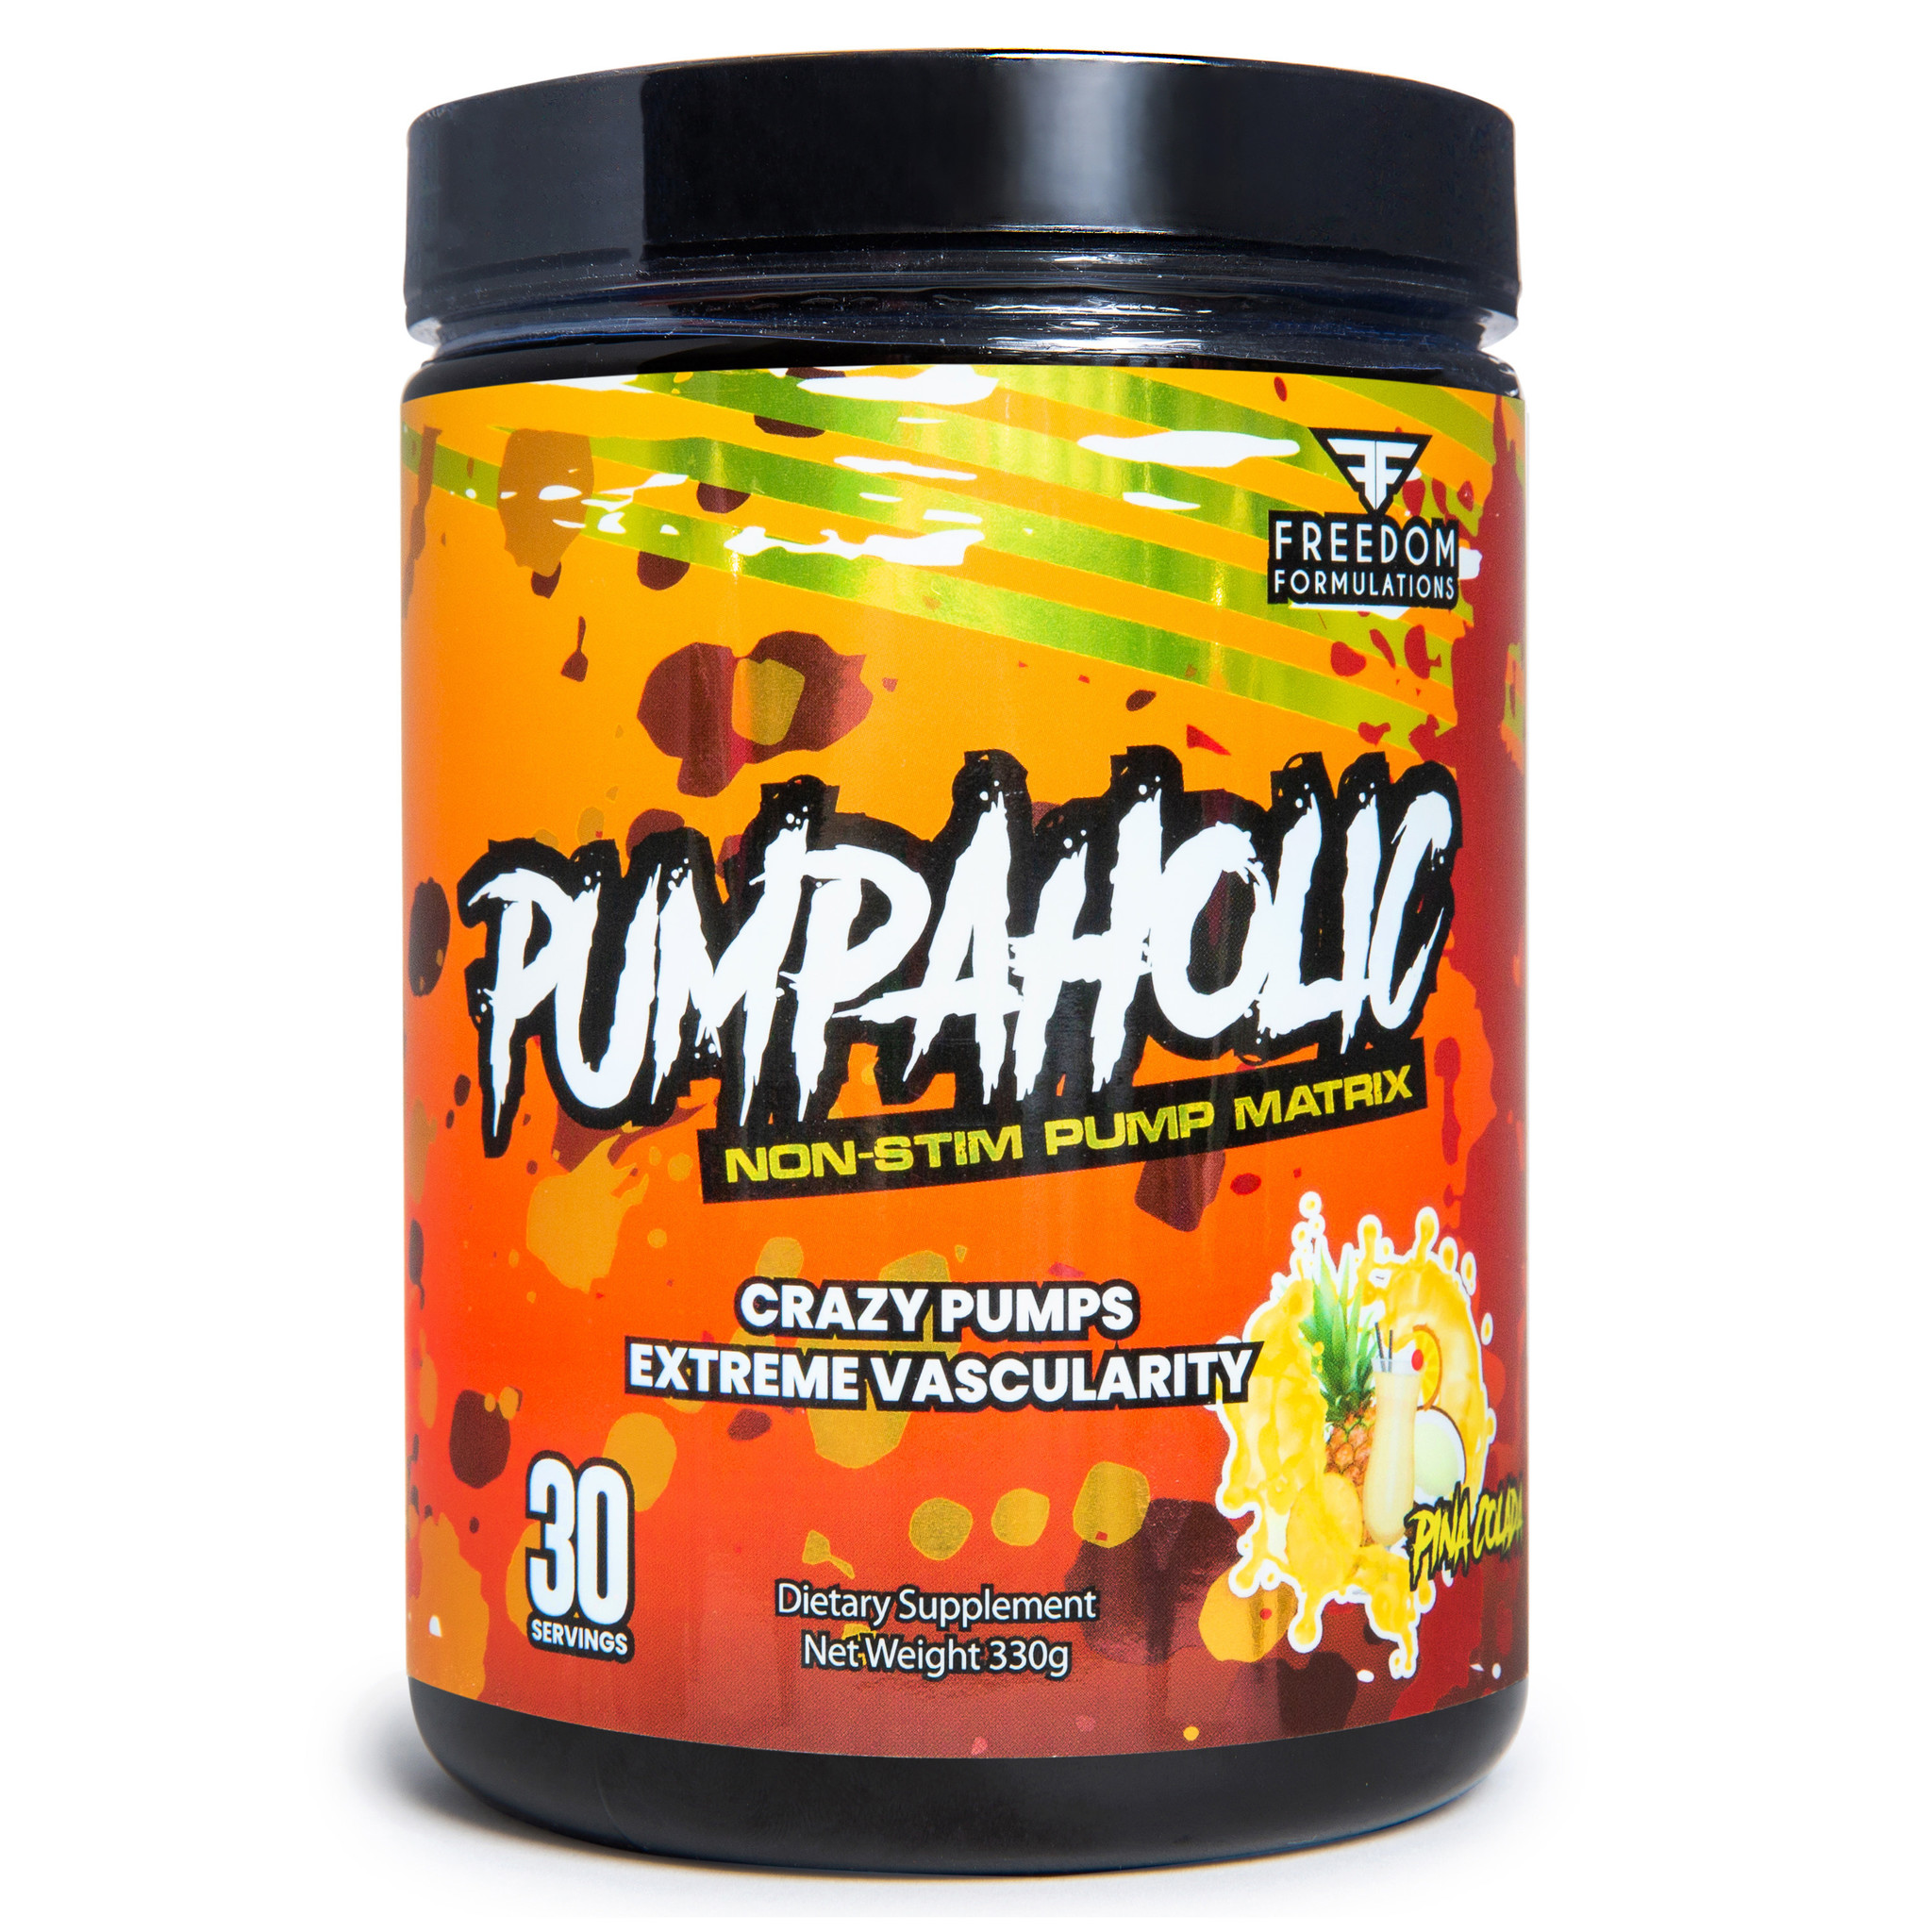 Recomended Rowdy pre workout for Workout at Gym